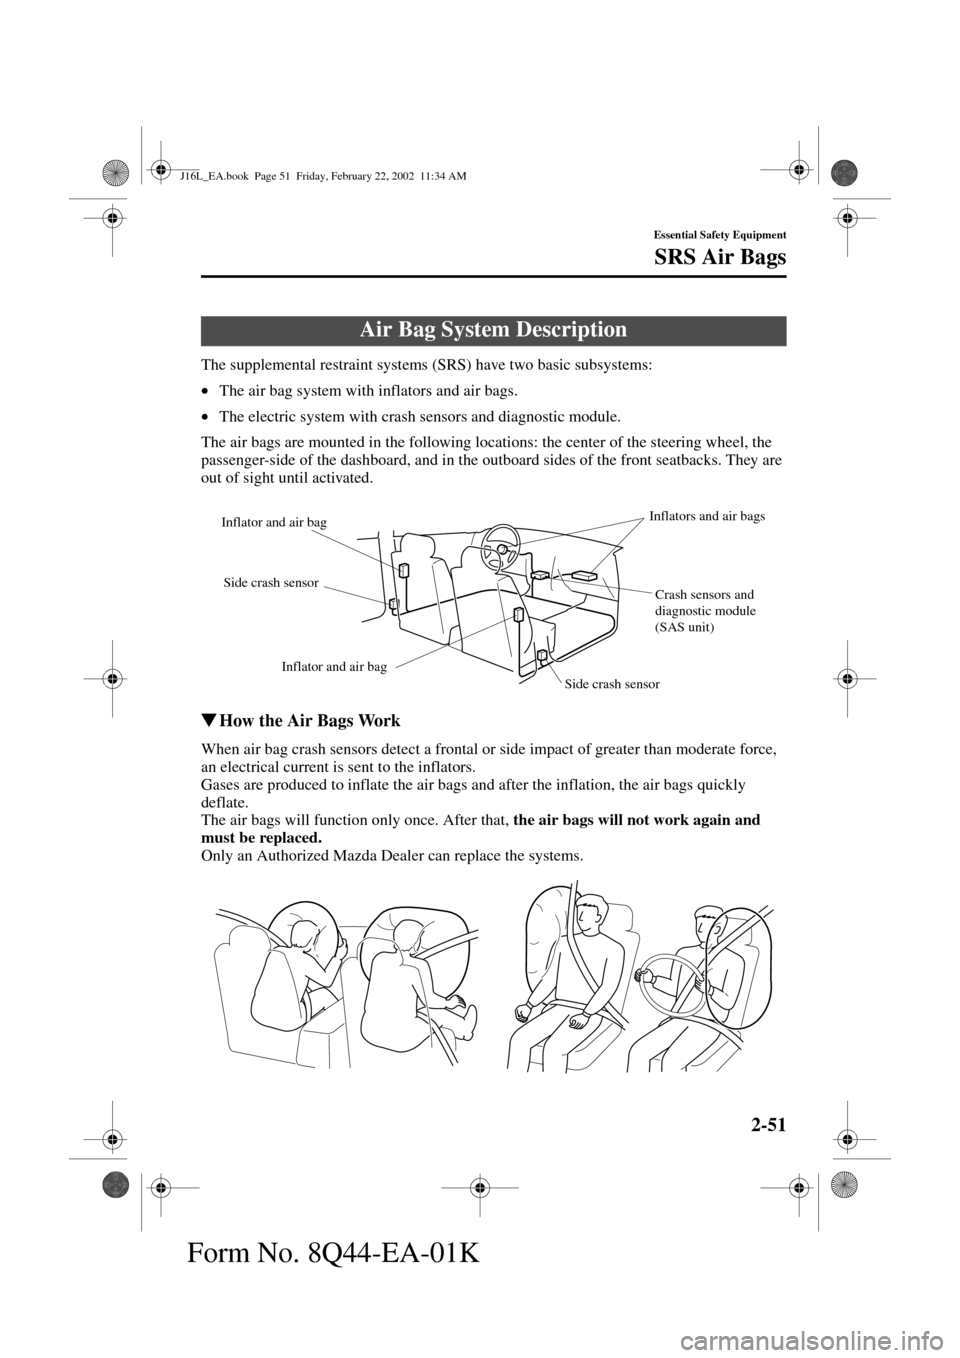 MAZDA MODEL MPV 2002  Owners Manual (in English) 2-51
Essential Safety Equipment
SRS Air Bags
Form No. 8Q44-EA-01K
The supplemental restraint systems (SRS) have two basic subsystems:
•The air bag system with inflators and air bags.
•The electric